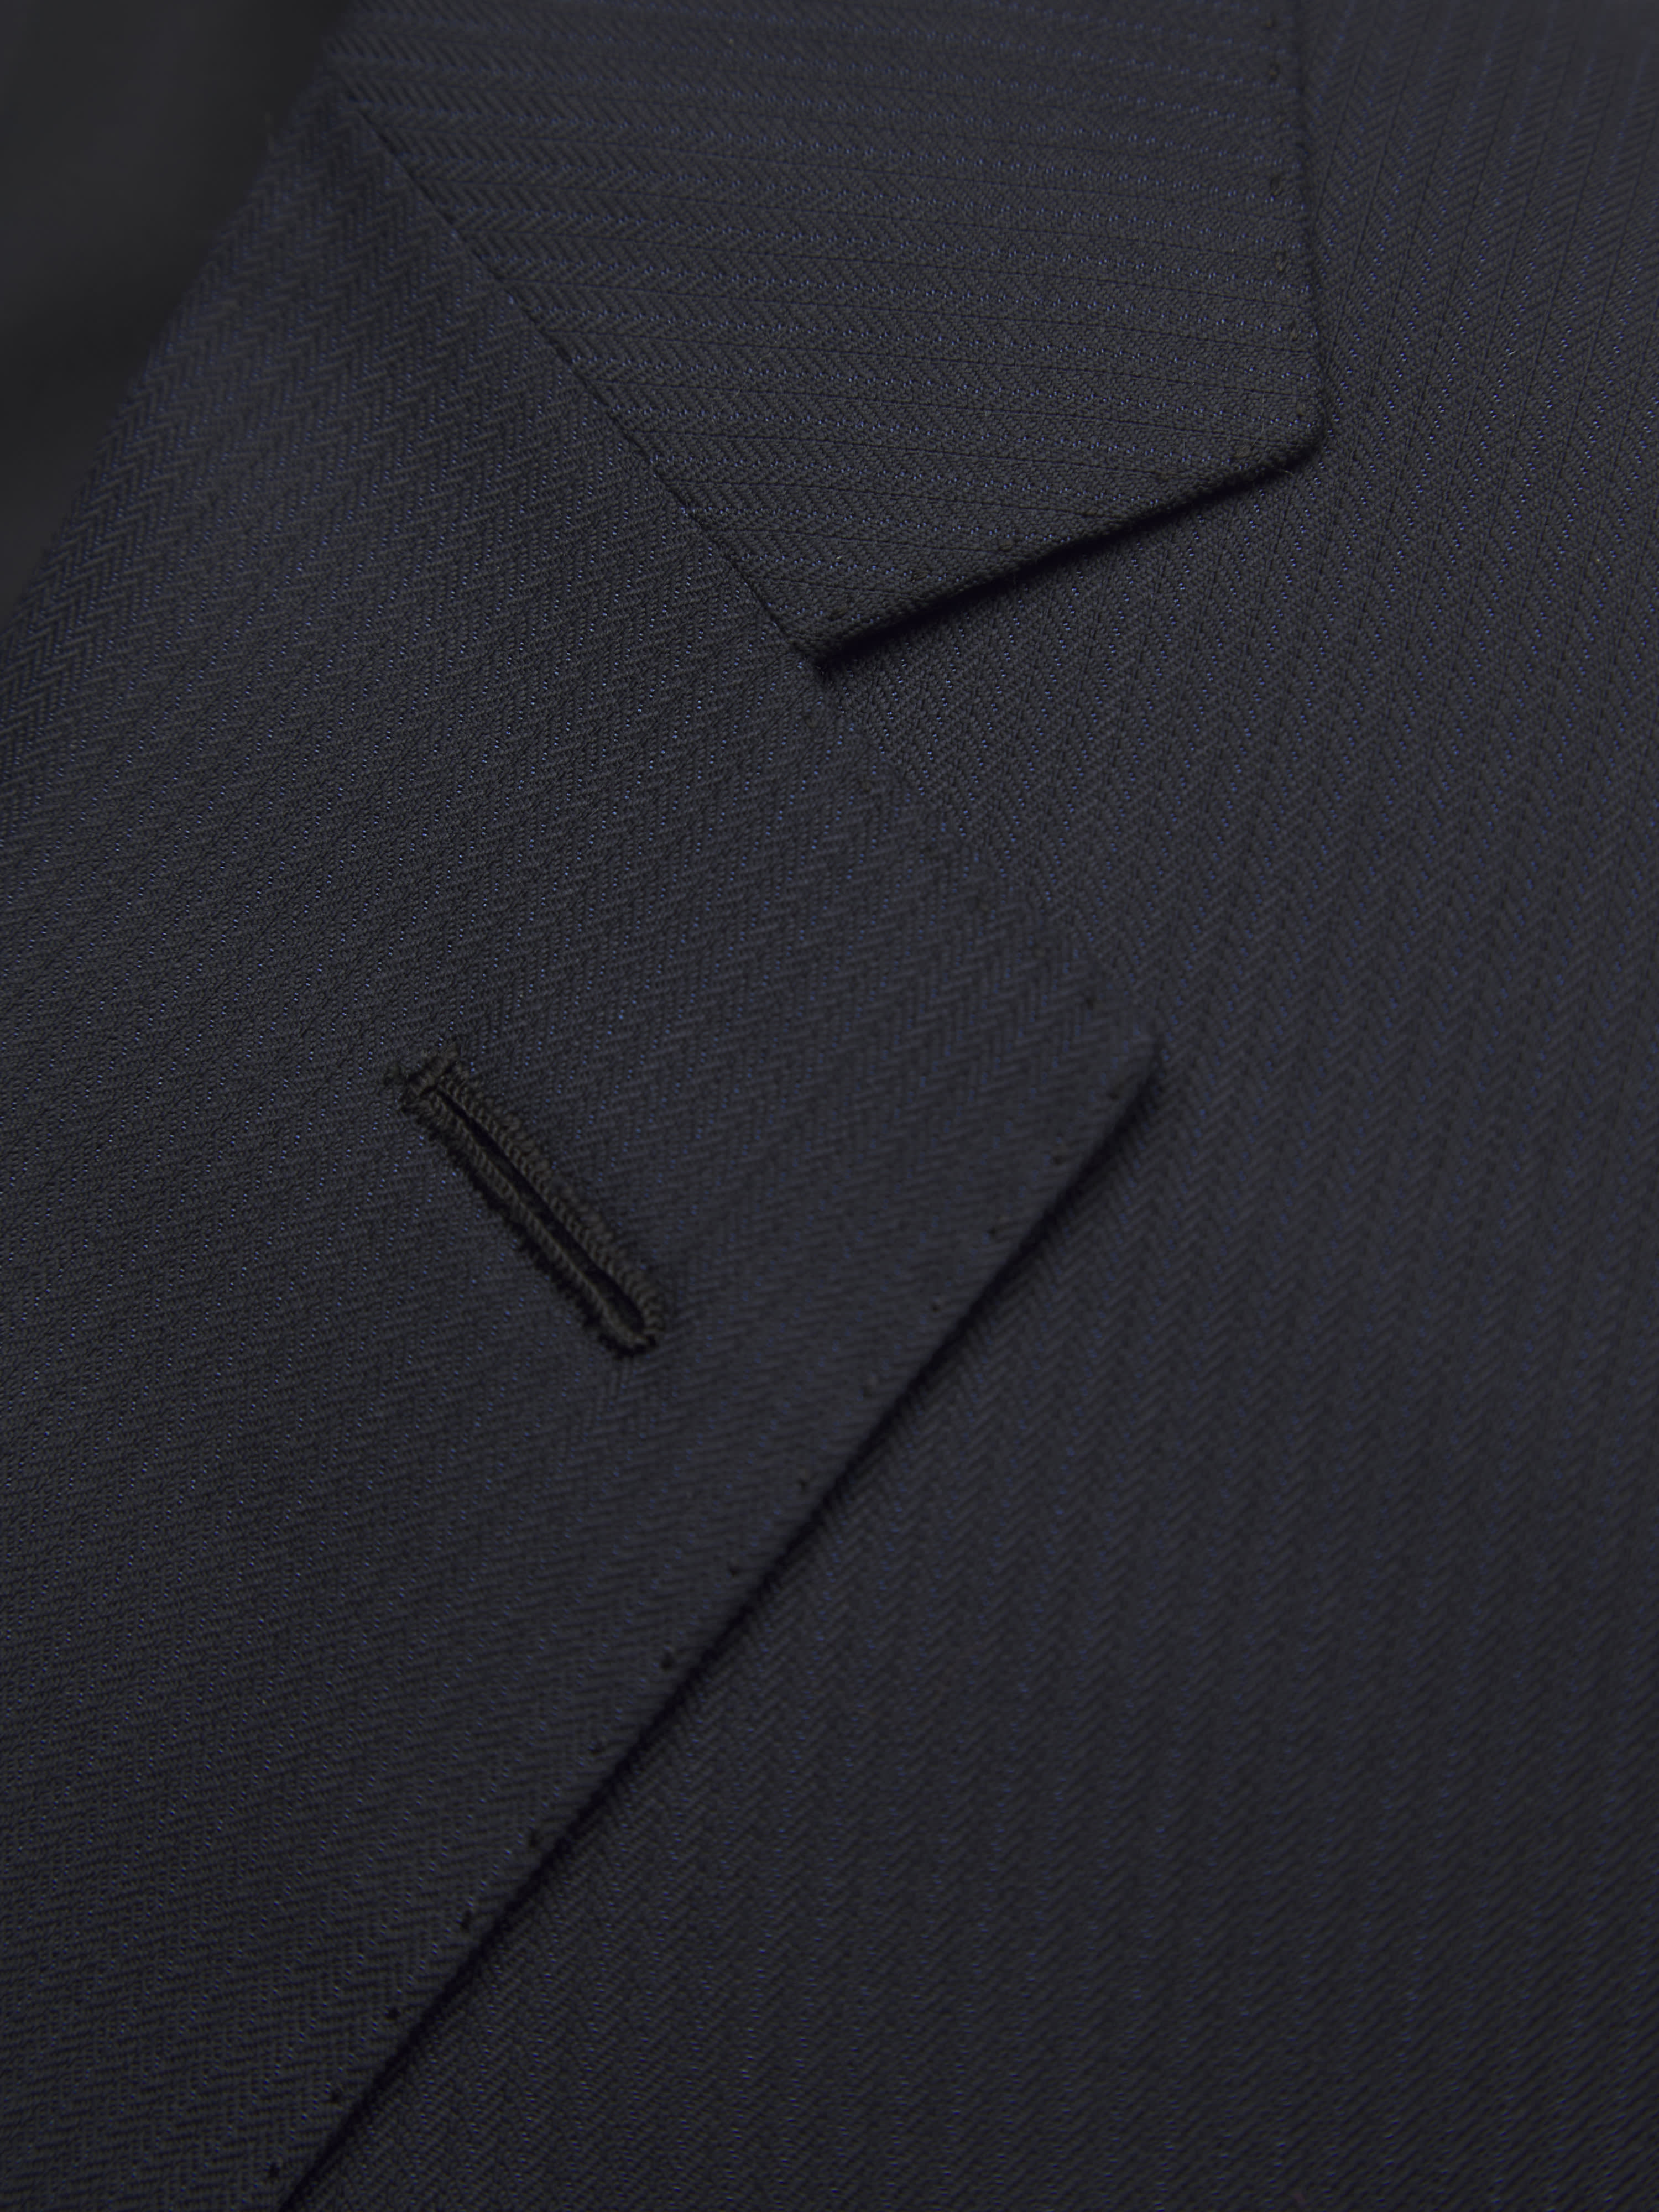 Midnight blue micro pinstriped Super 200's wool Brunico suit | Brioni ...